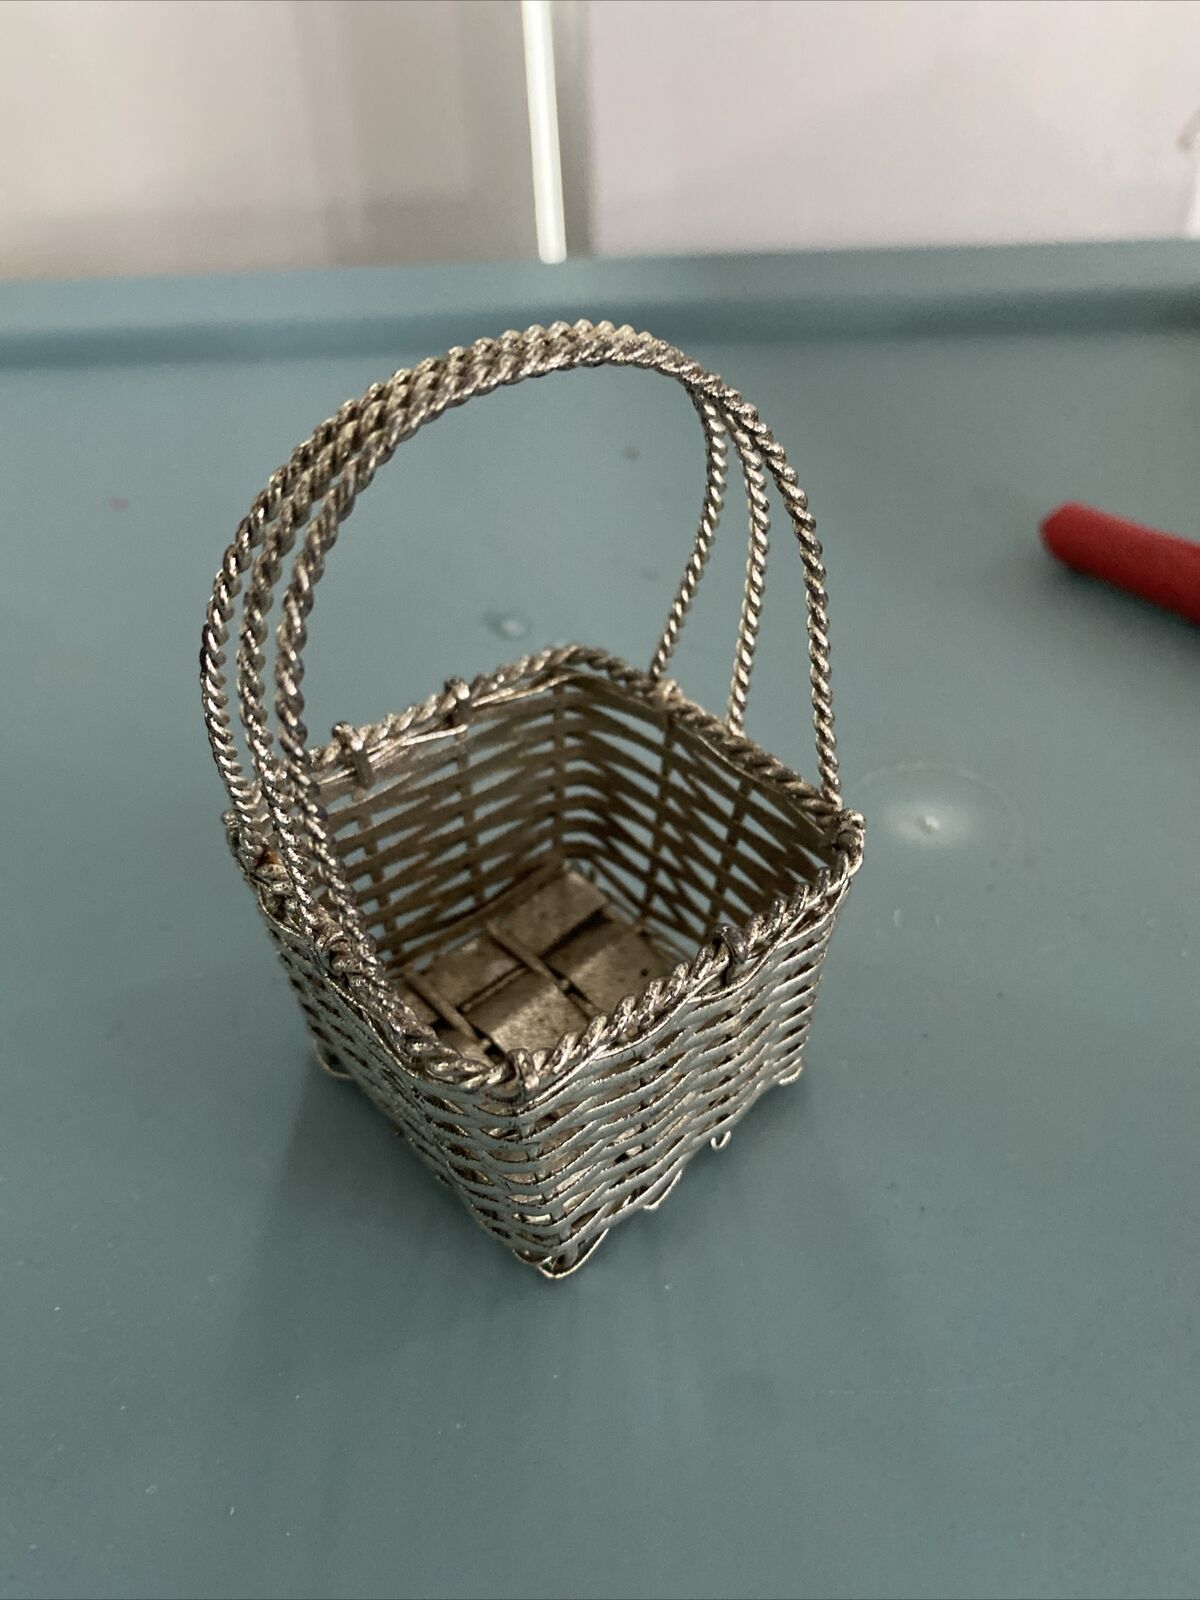 Vintage Silver Metal Miniature Basket Woven Wire Handle Gift Basket 2.25”Square